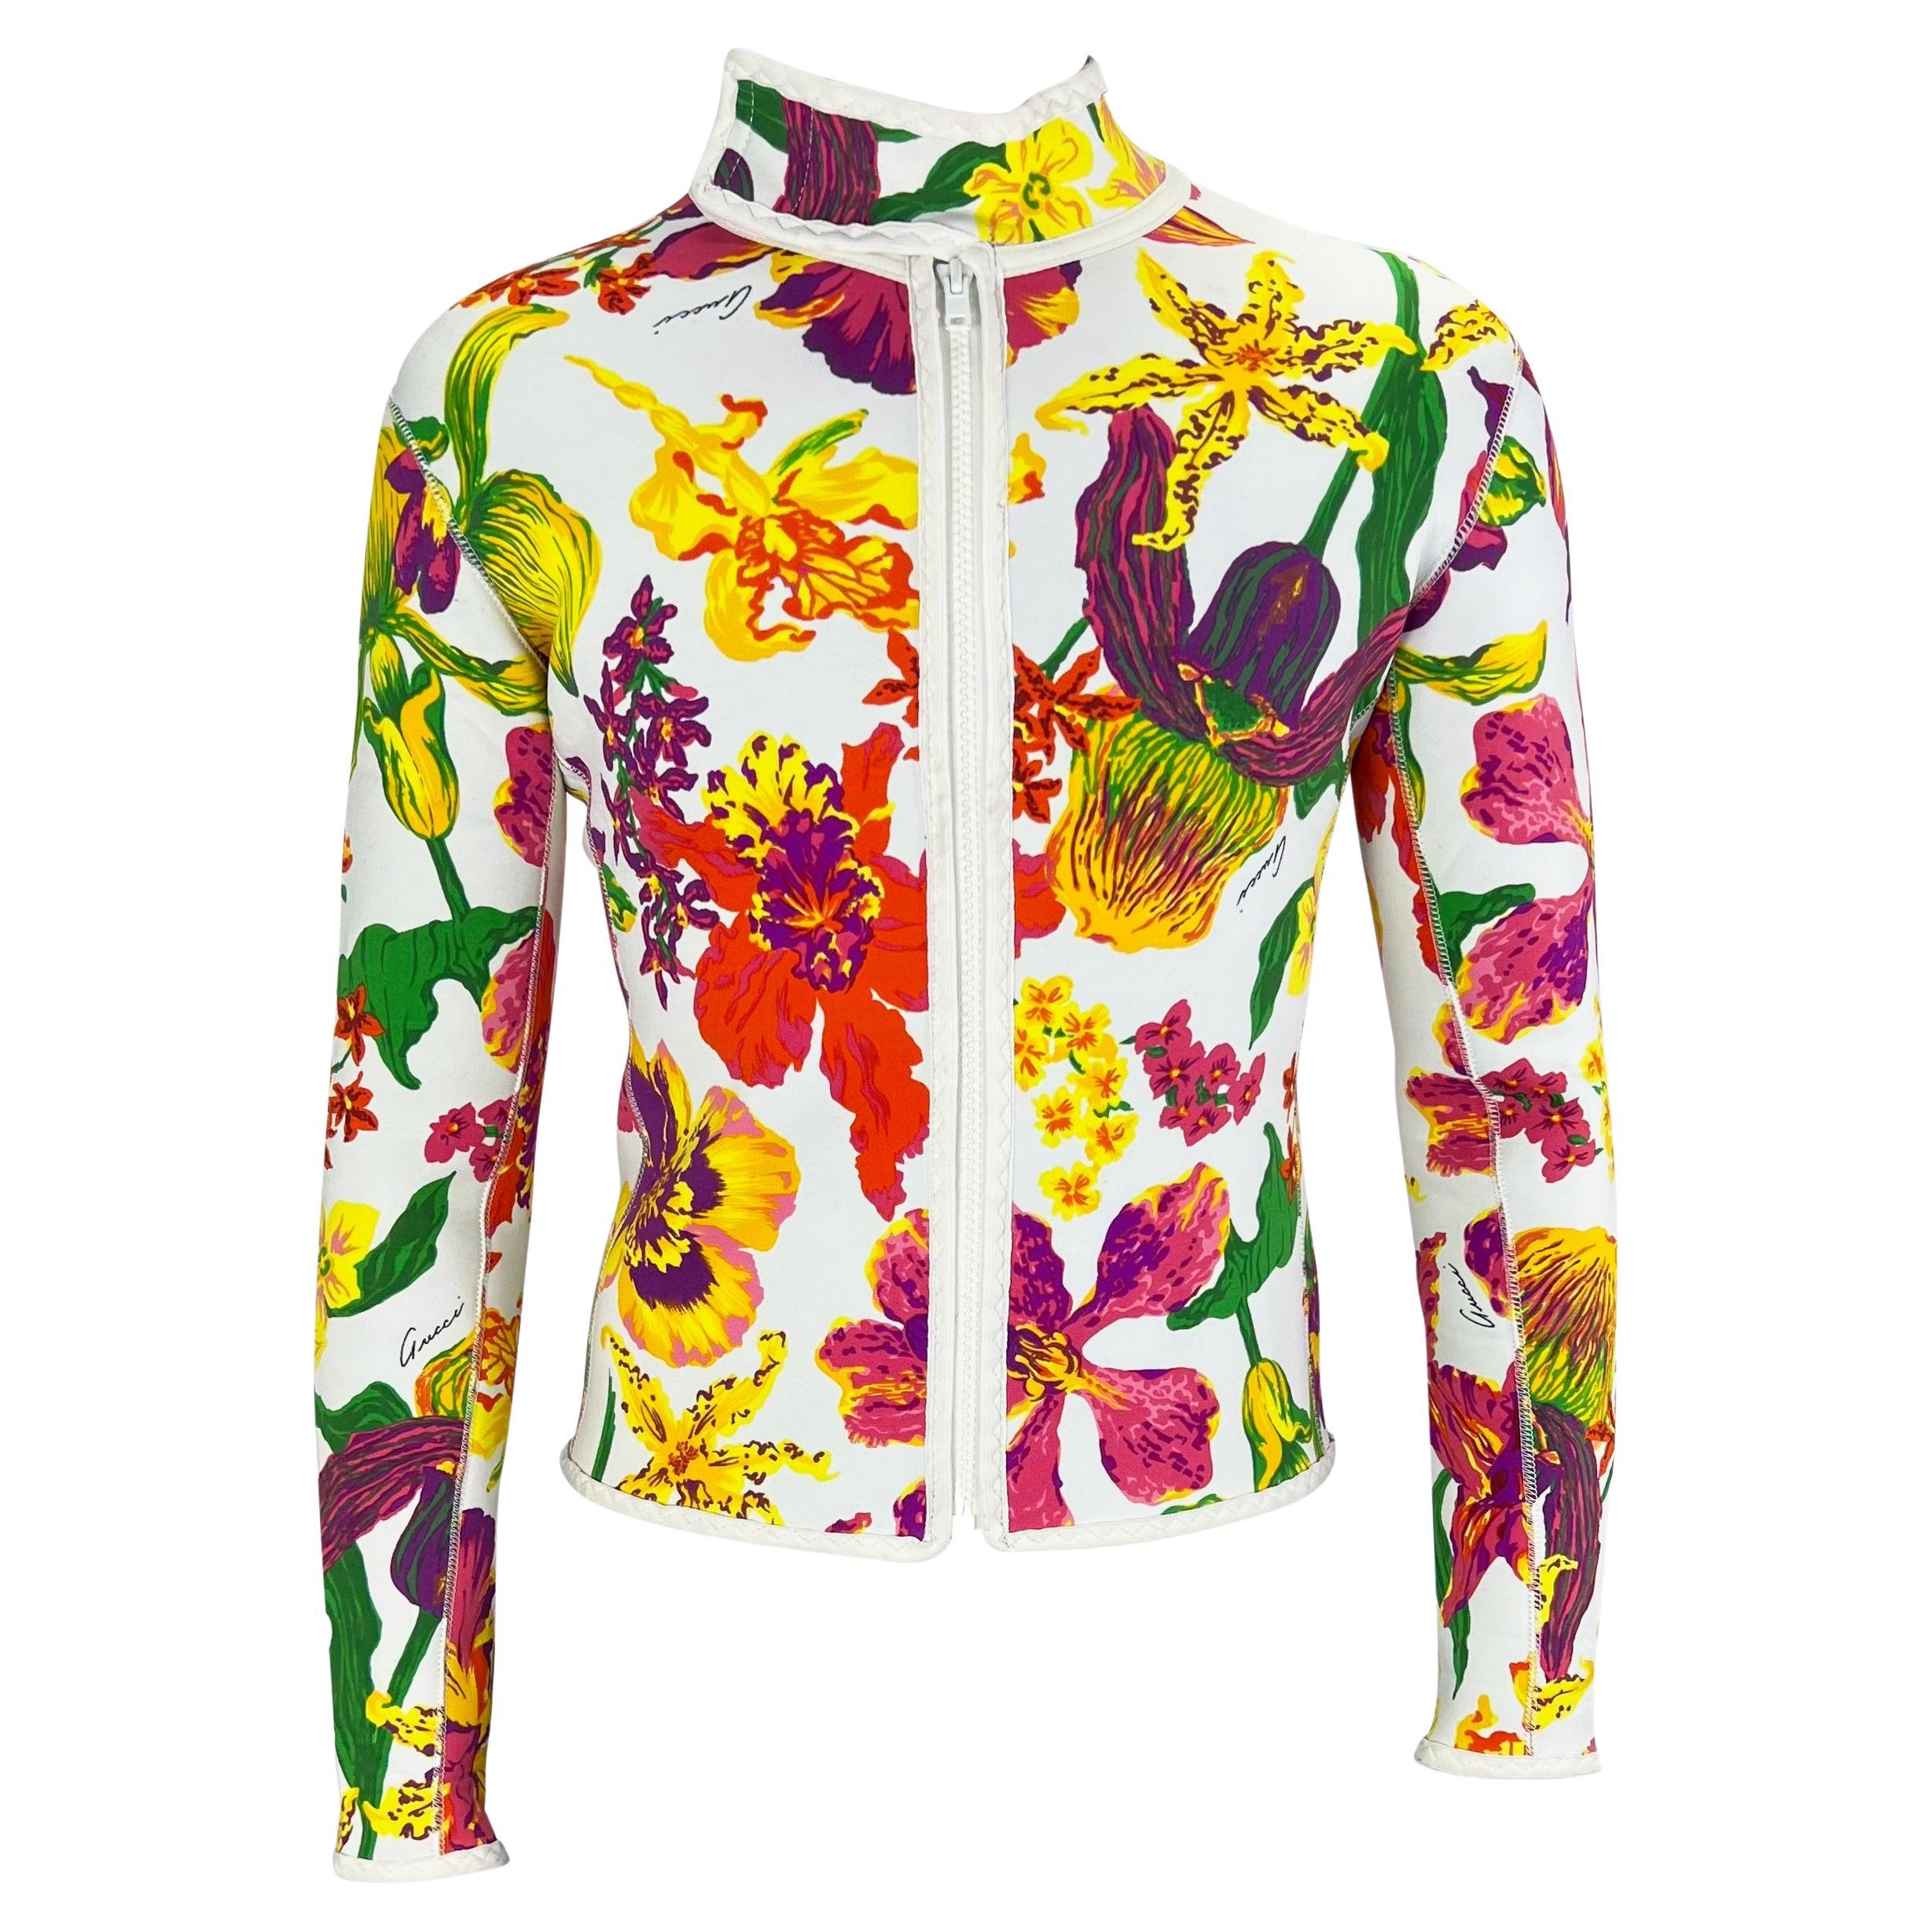 S/S 1999 Gucci by Tom Ford Men's Runway Ad White Floral Neoprene Scuba Jacket For Sale